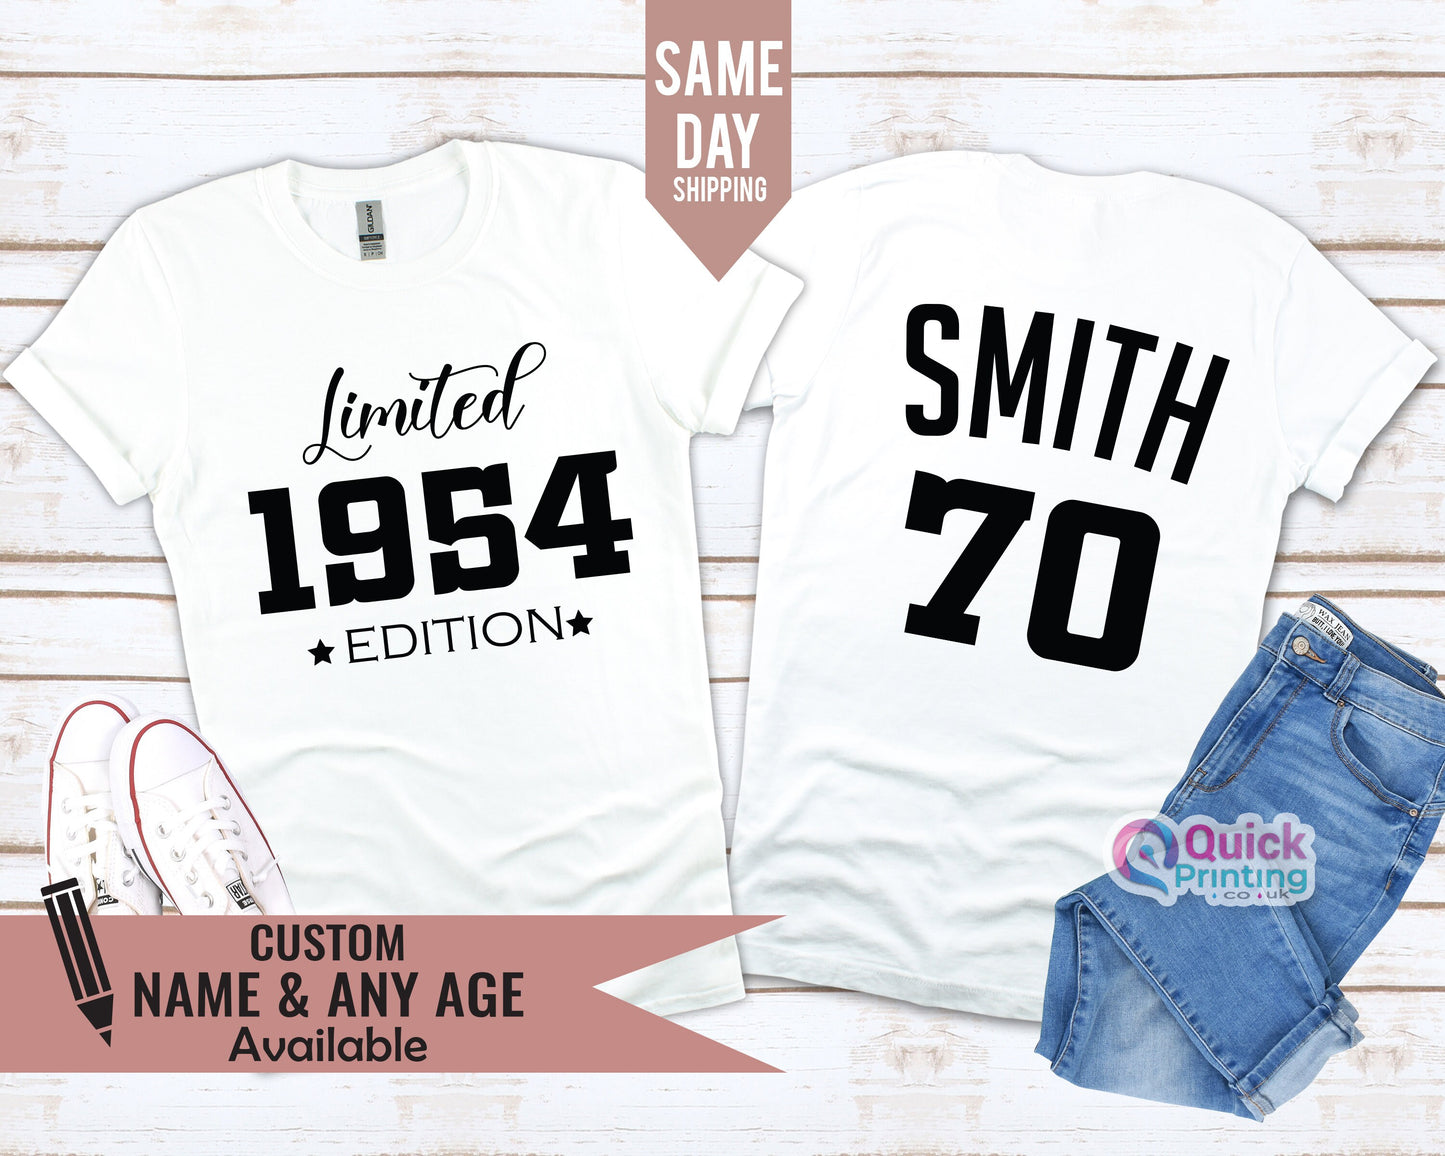 limited Edition 1954 Tshirt, 70th Birthday Gift for men, Personalised Birthday Vintage Tshirt, 70th Birthday Gift for Dad, Xmas gift for him